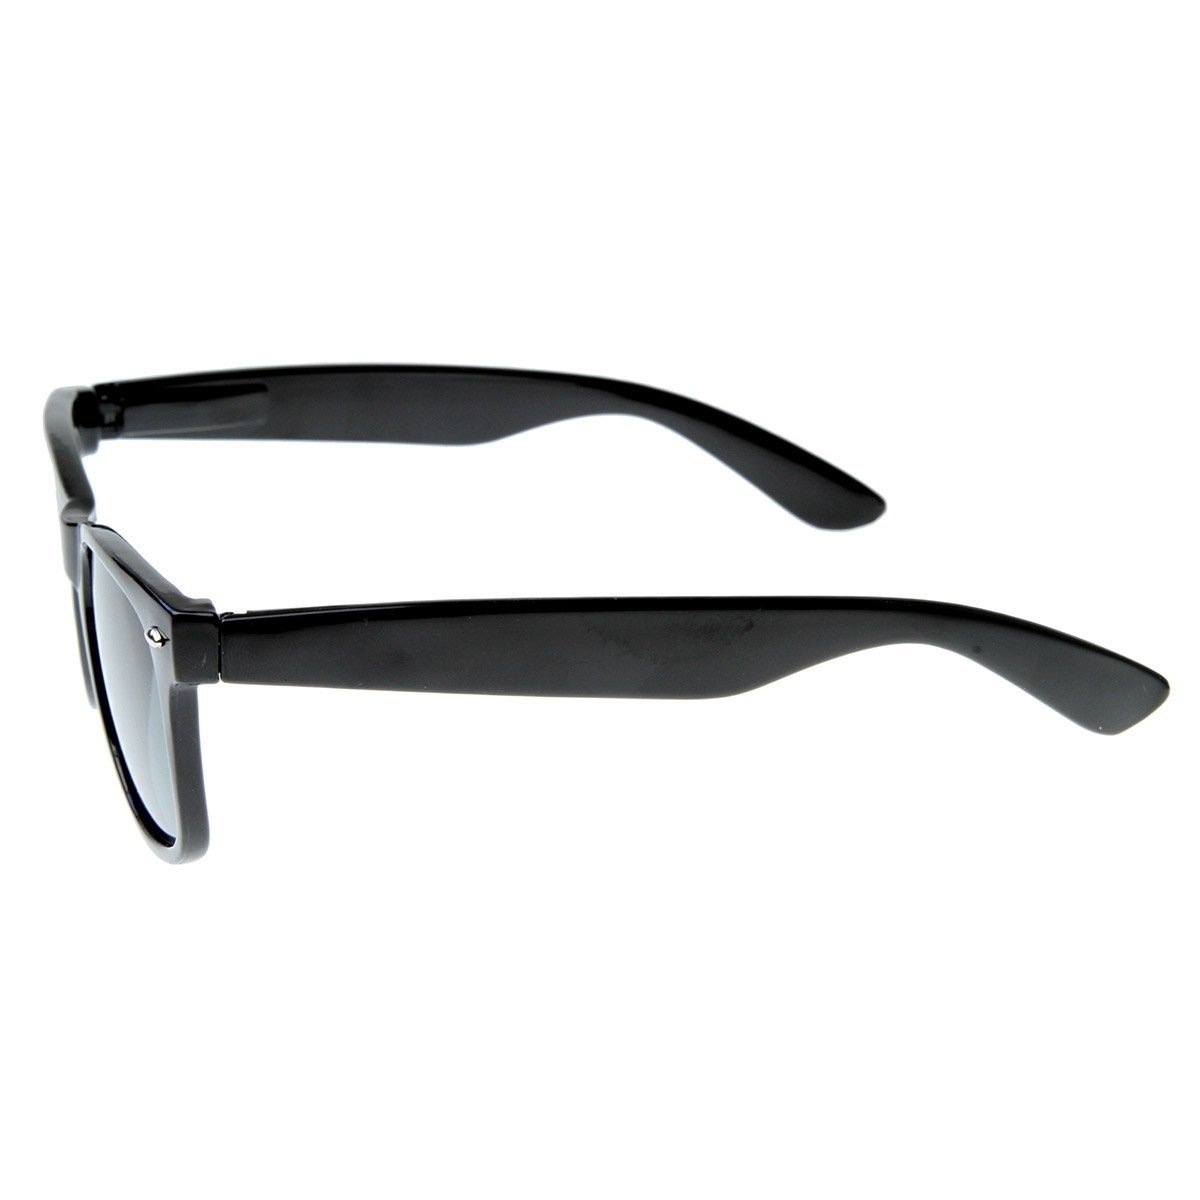 Standard Issue Iconic Retro Large Classic Horn Rimmed Style Sunglasses - Black